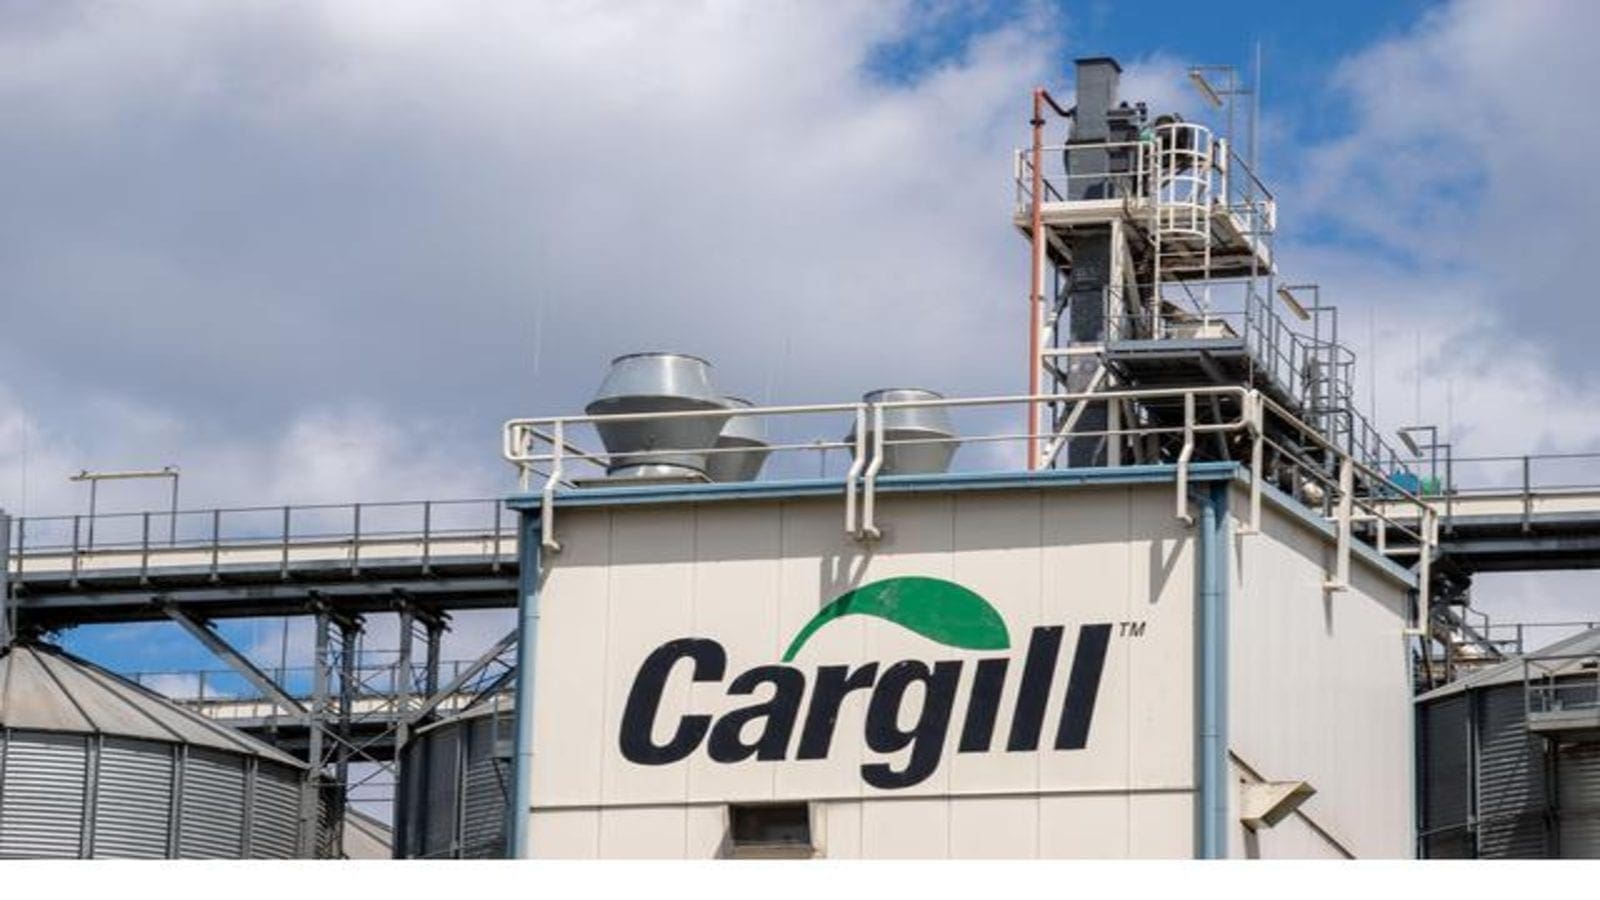 Cargill expands joint venture with CHS as Uralchem eyes takeover of its assets in Russia